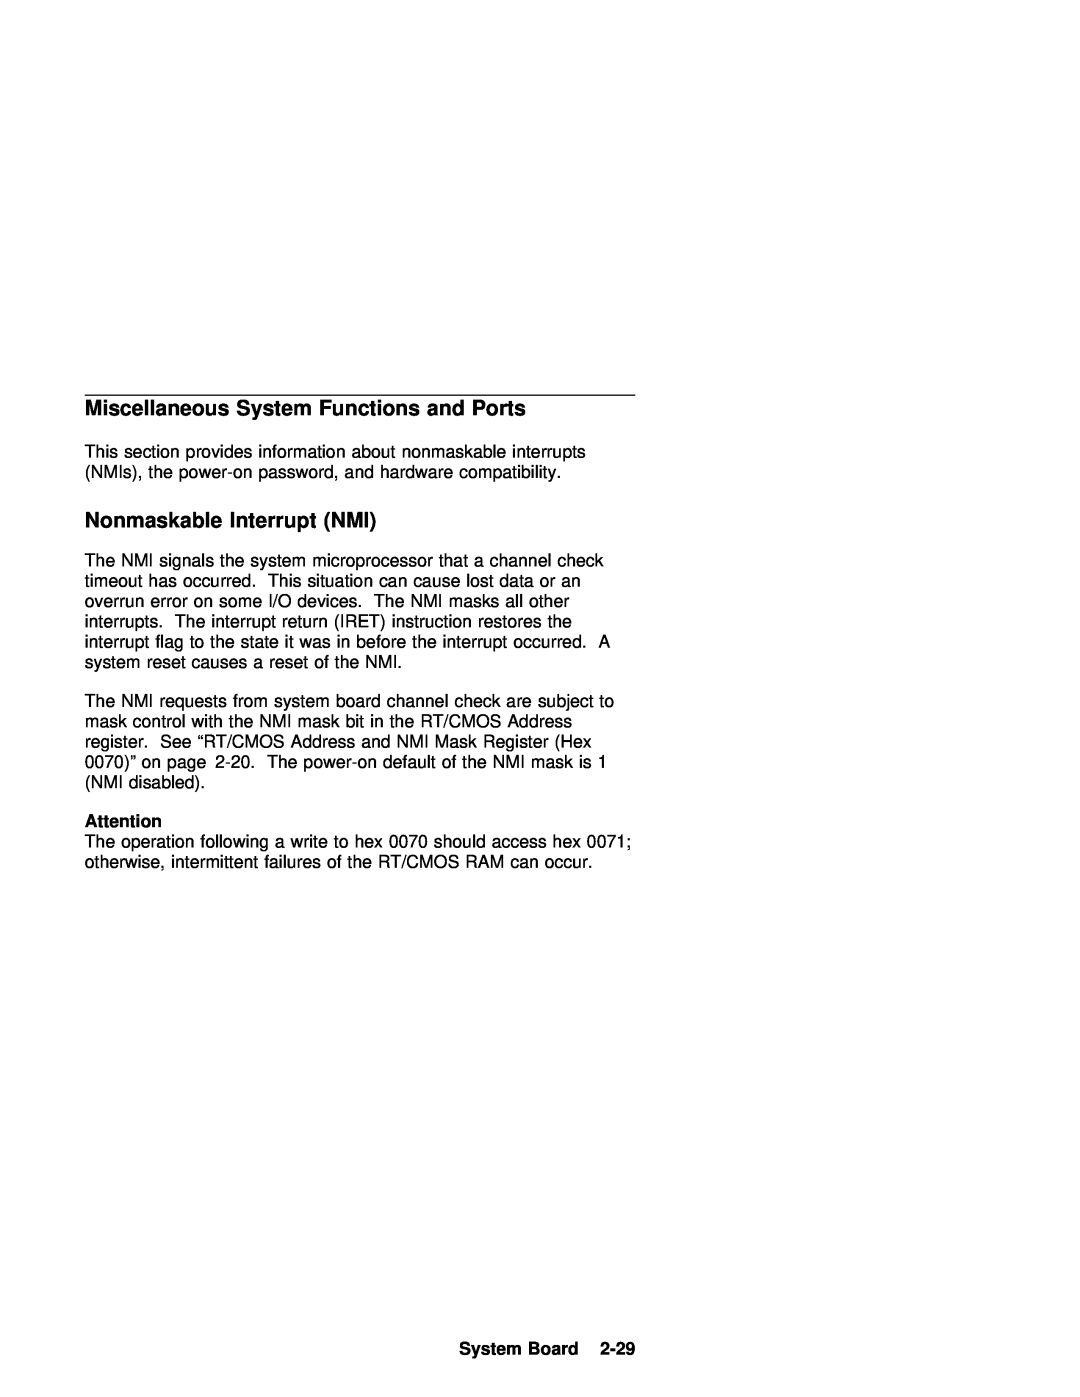 IBM 770 manual Miscellaneous System Functions and Ports, Nonmaskable Interrupt NMI, System Board 